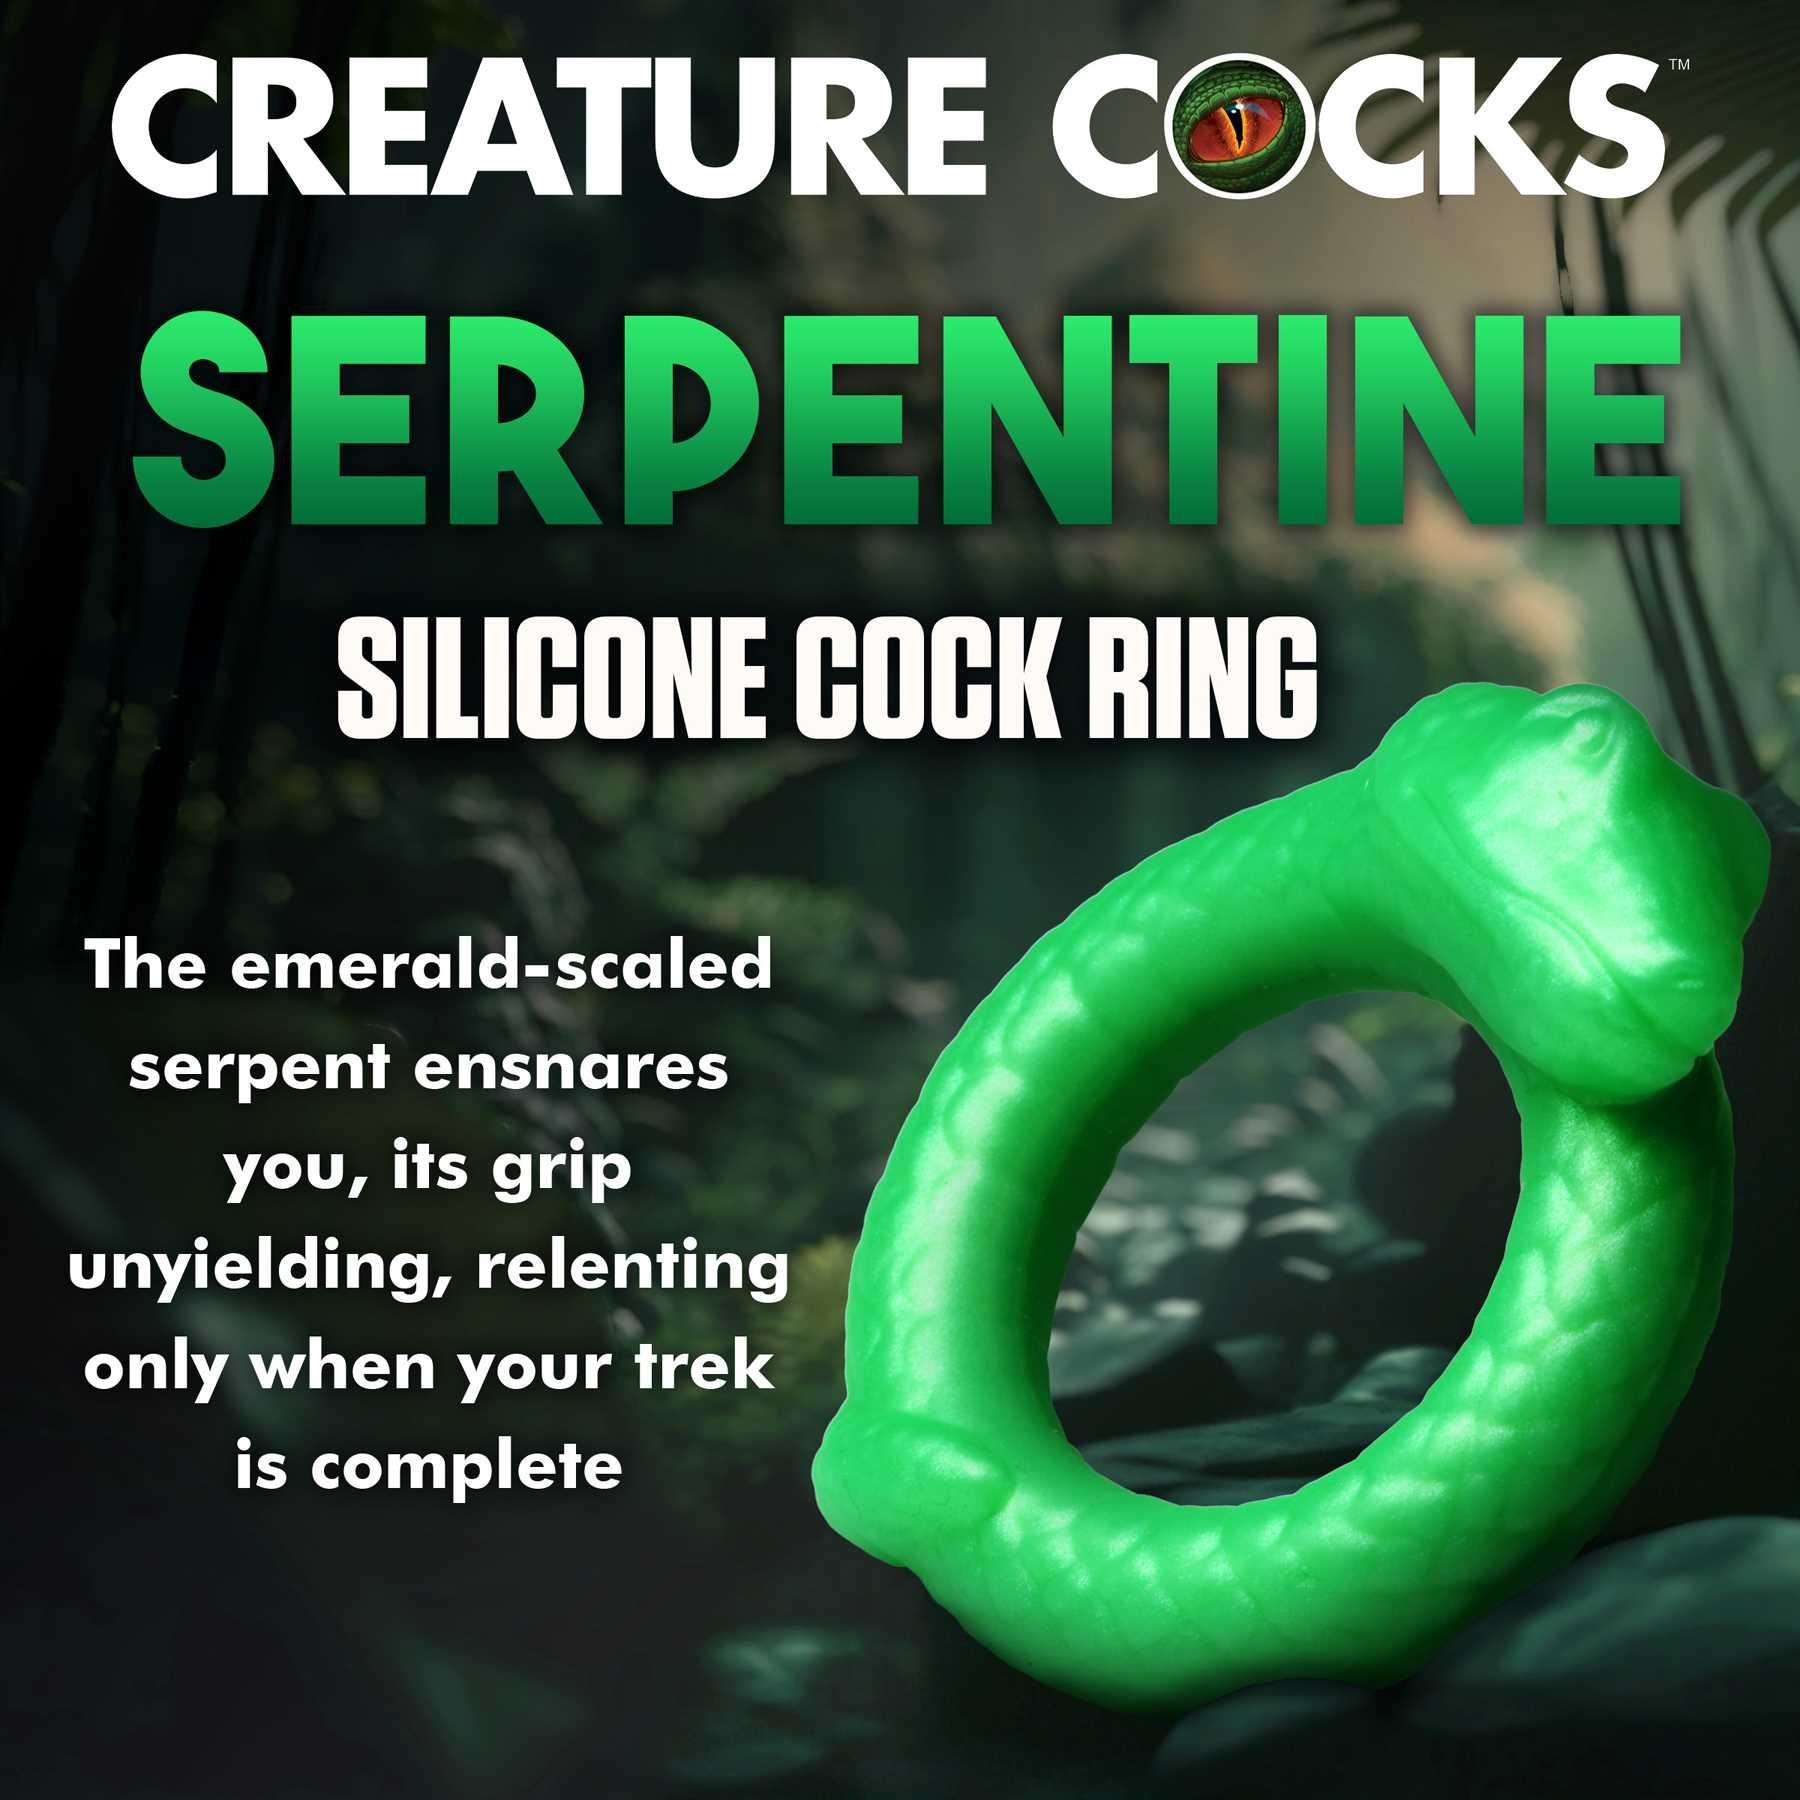 Creature Cocks Serpentine Silicone Cock Ring features call out sheet #2